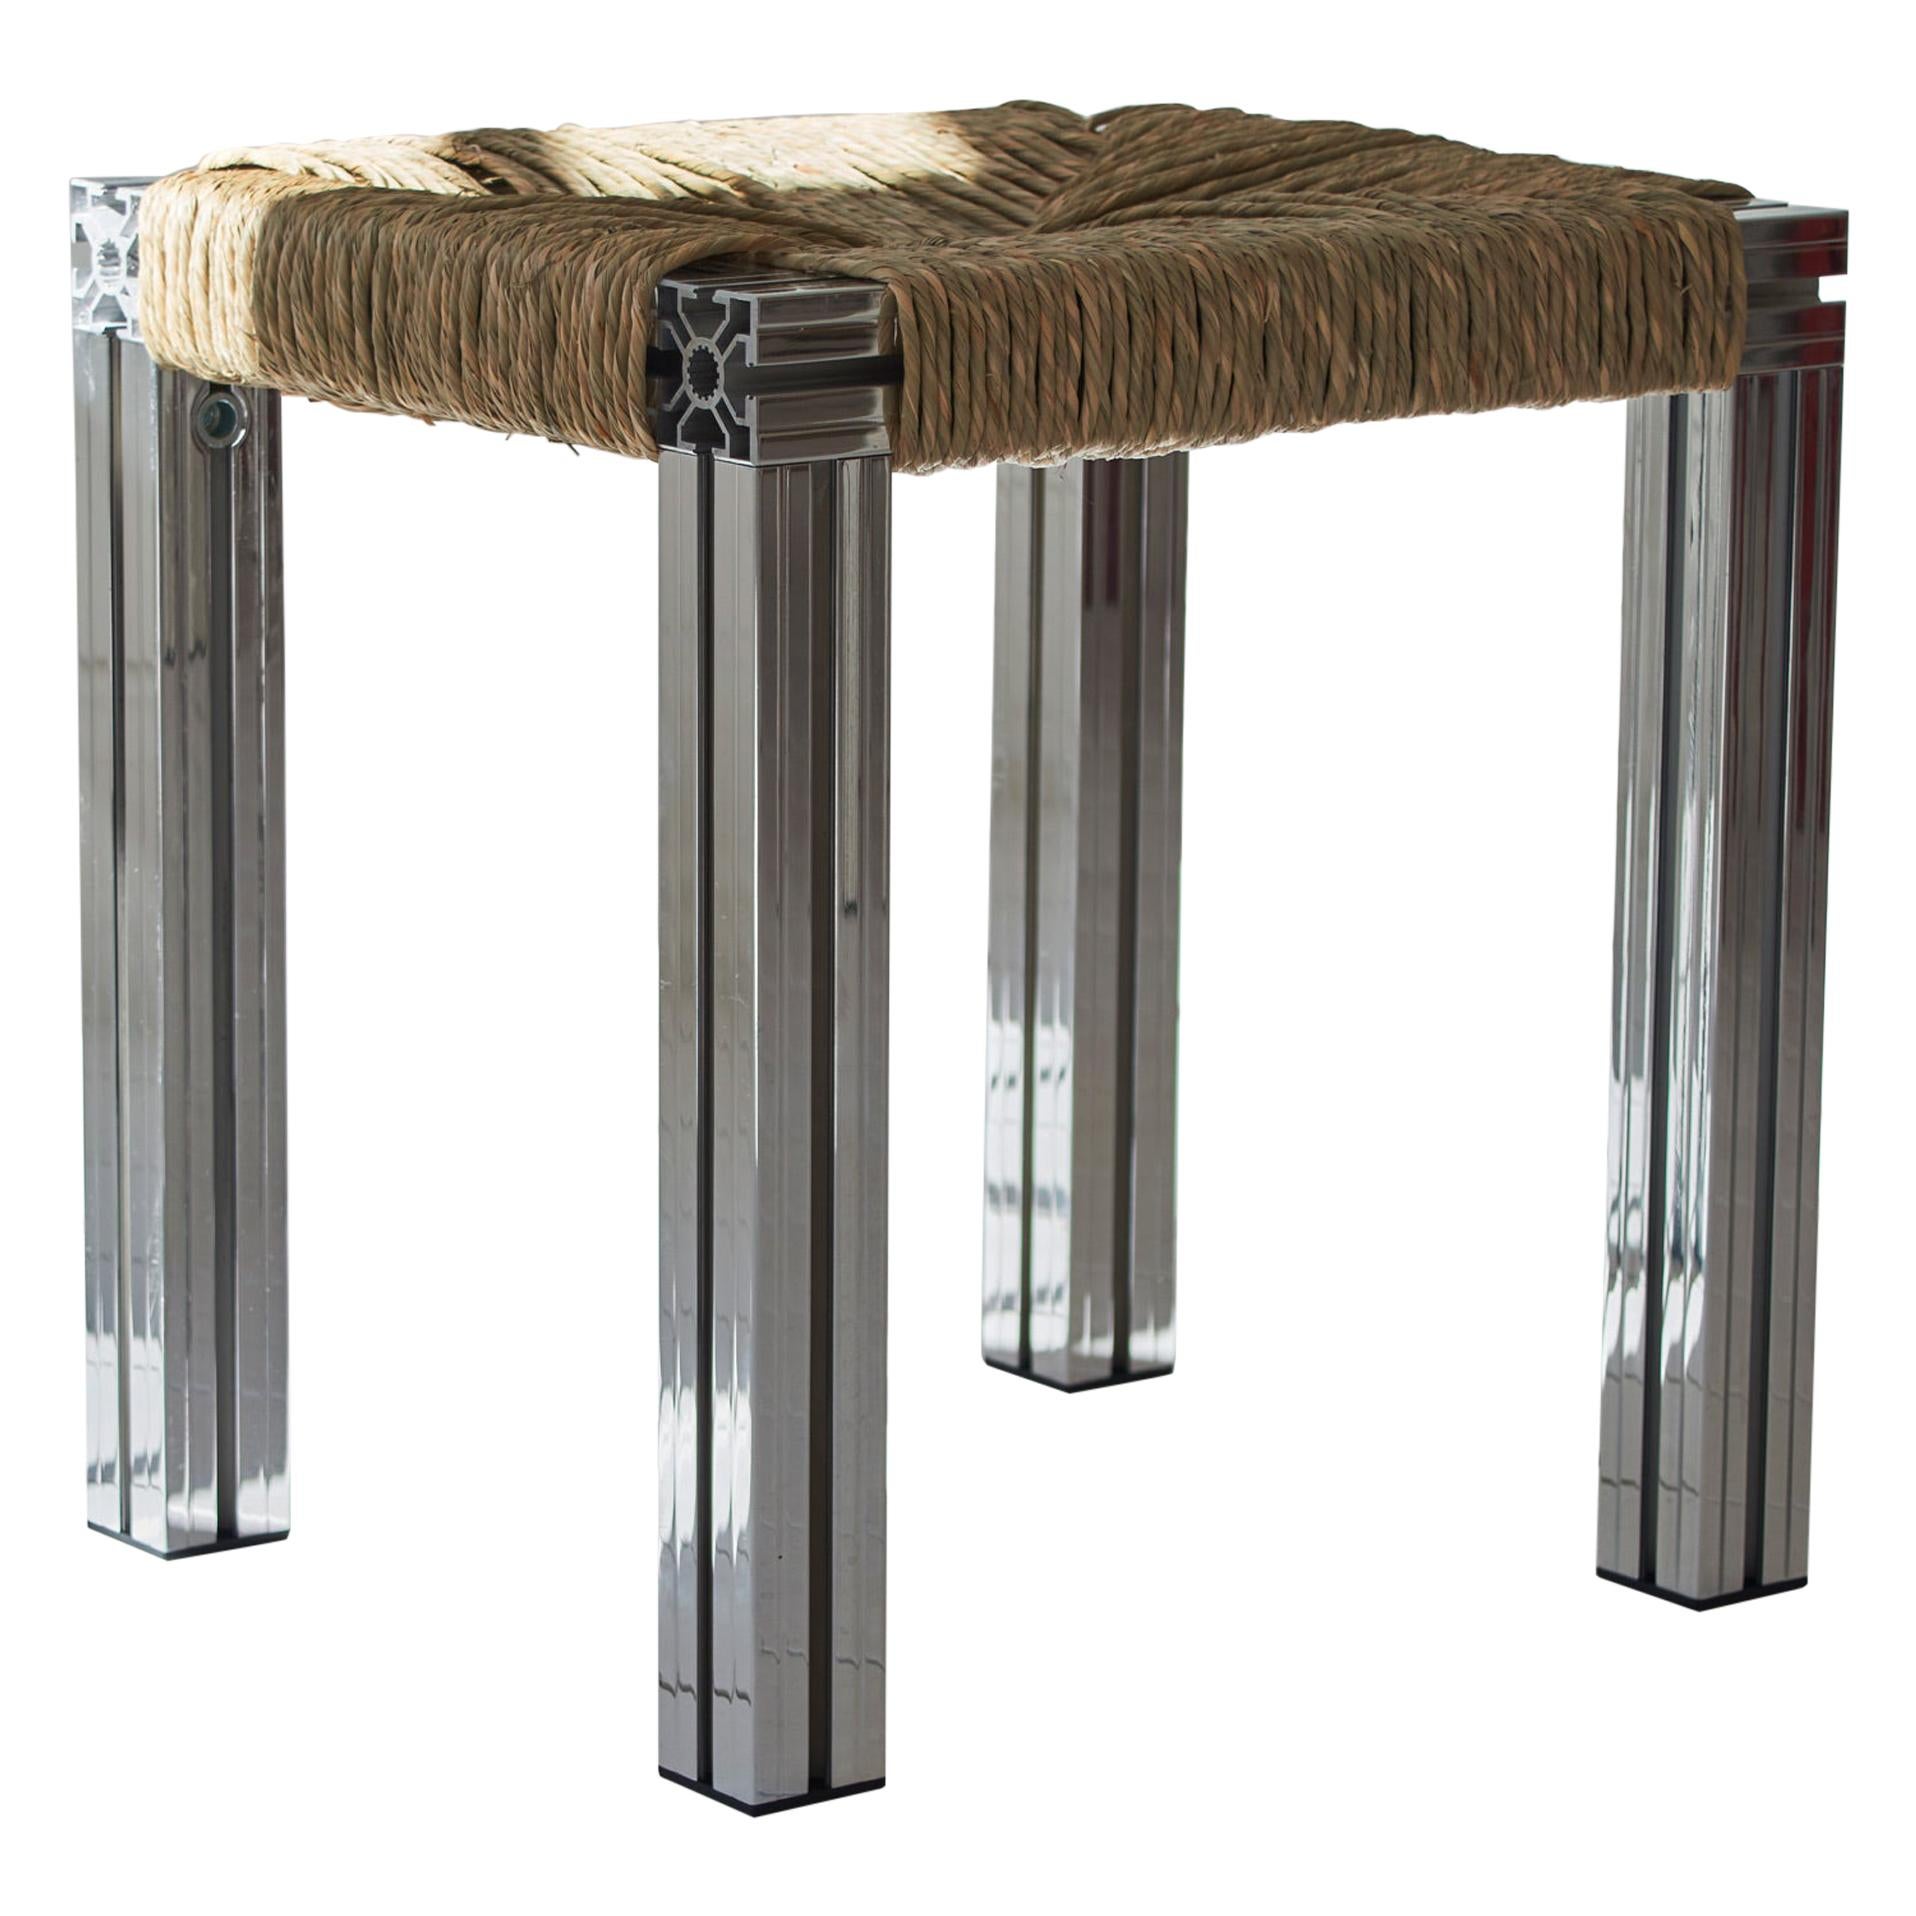 Polished Aluminium Stool with Reel Rush Seating from Anodised Wicker Collection